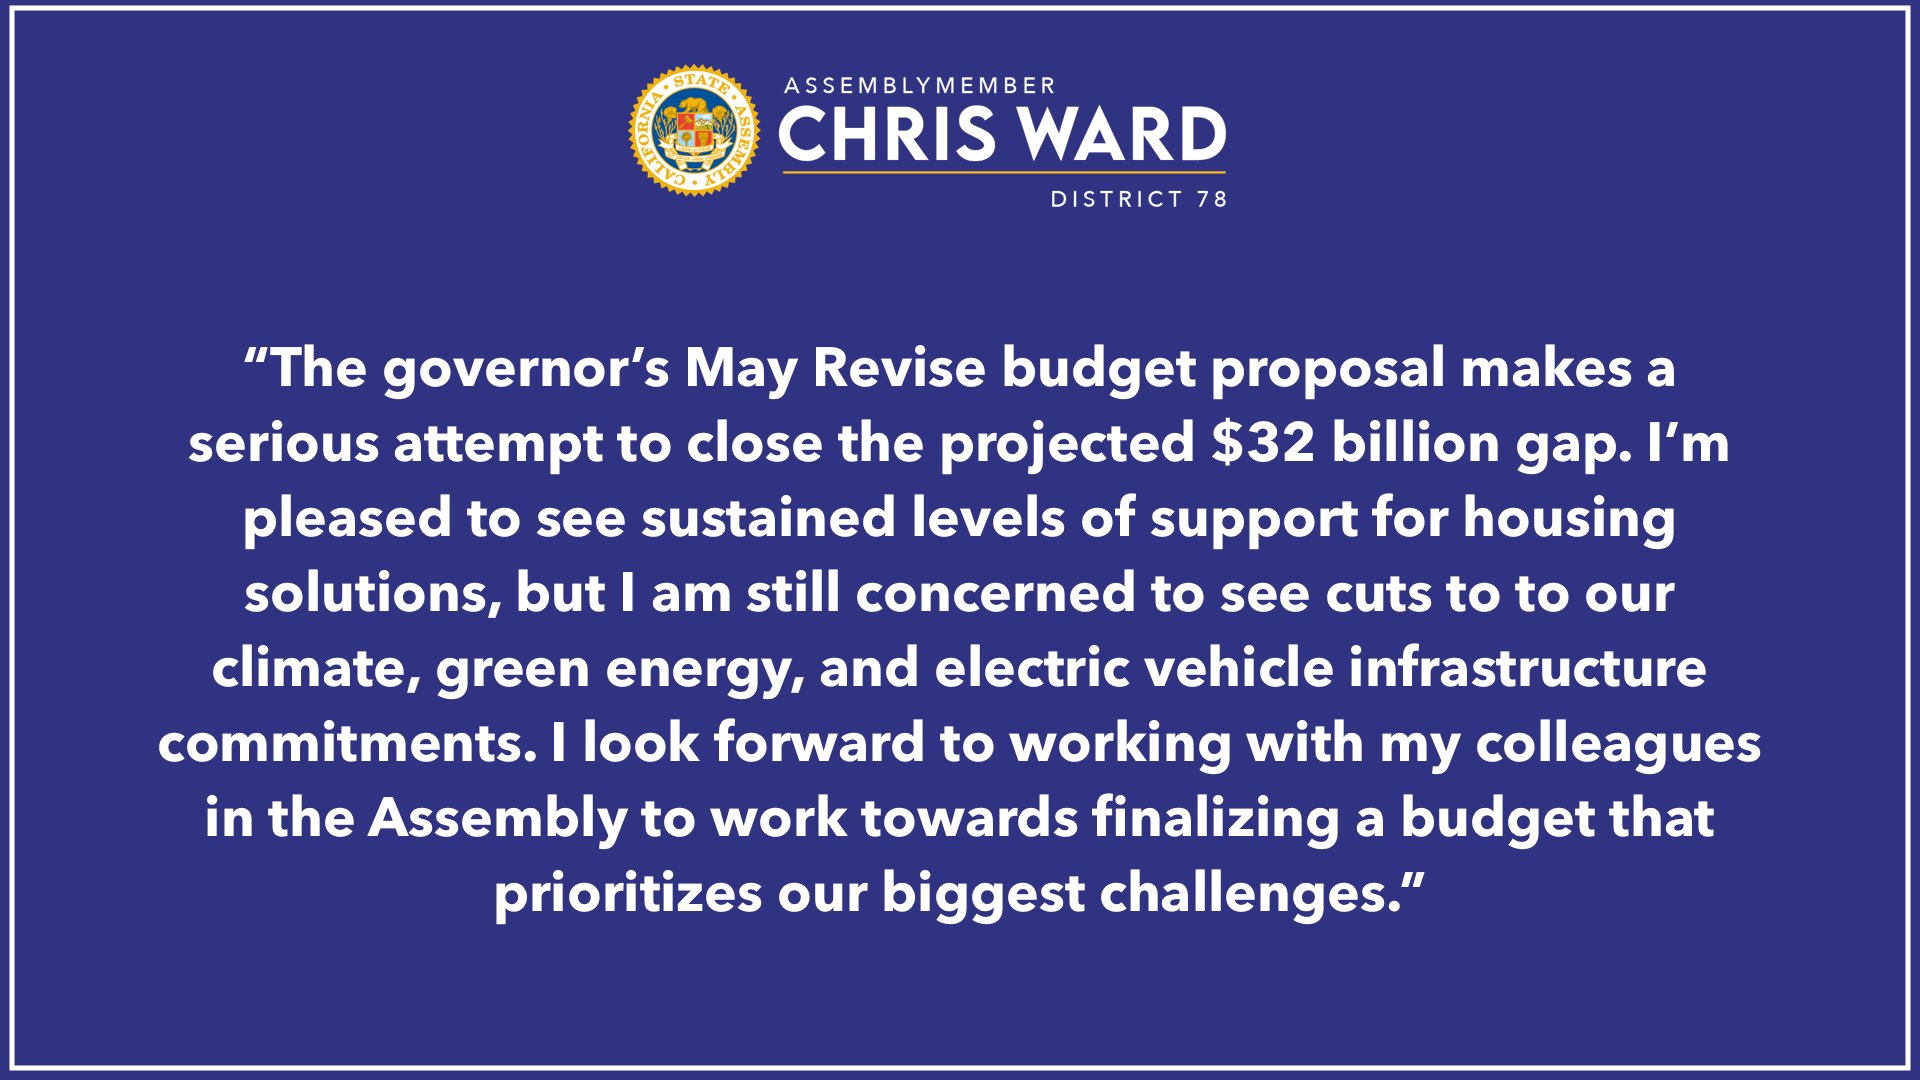 Assemblymember Ward Statement on the May Revise Budget Proposal